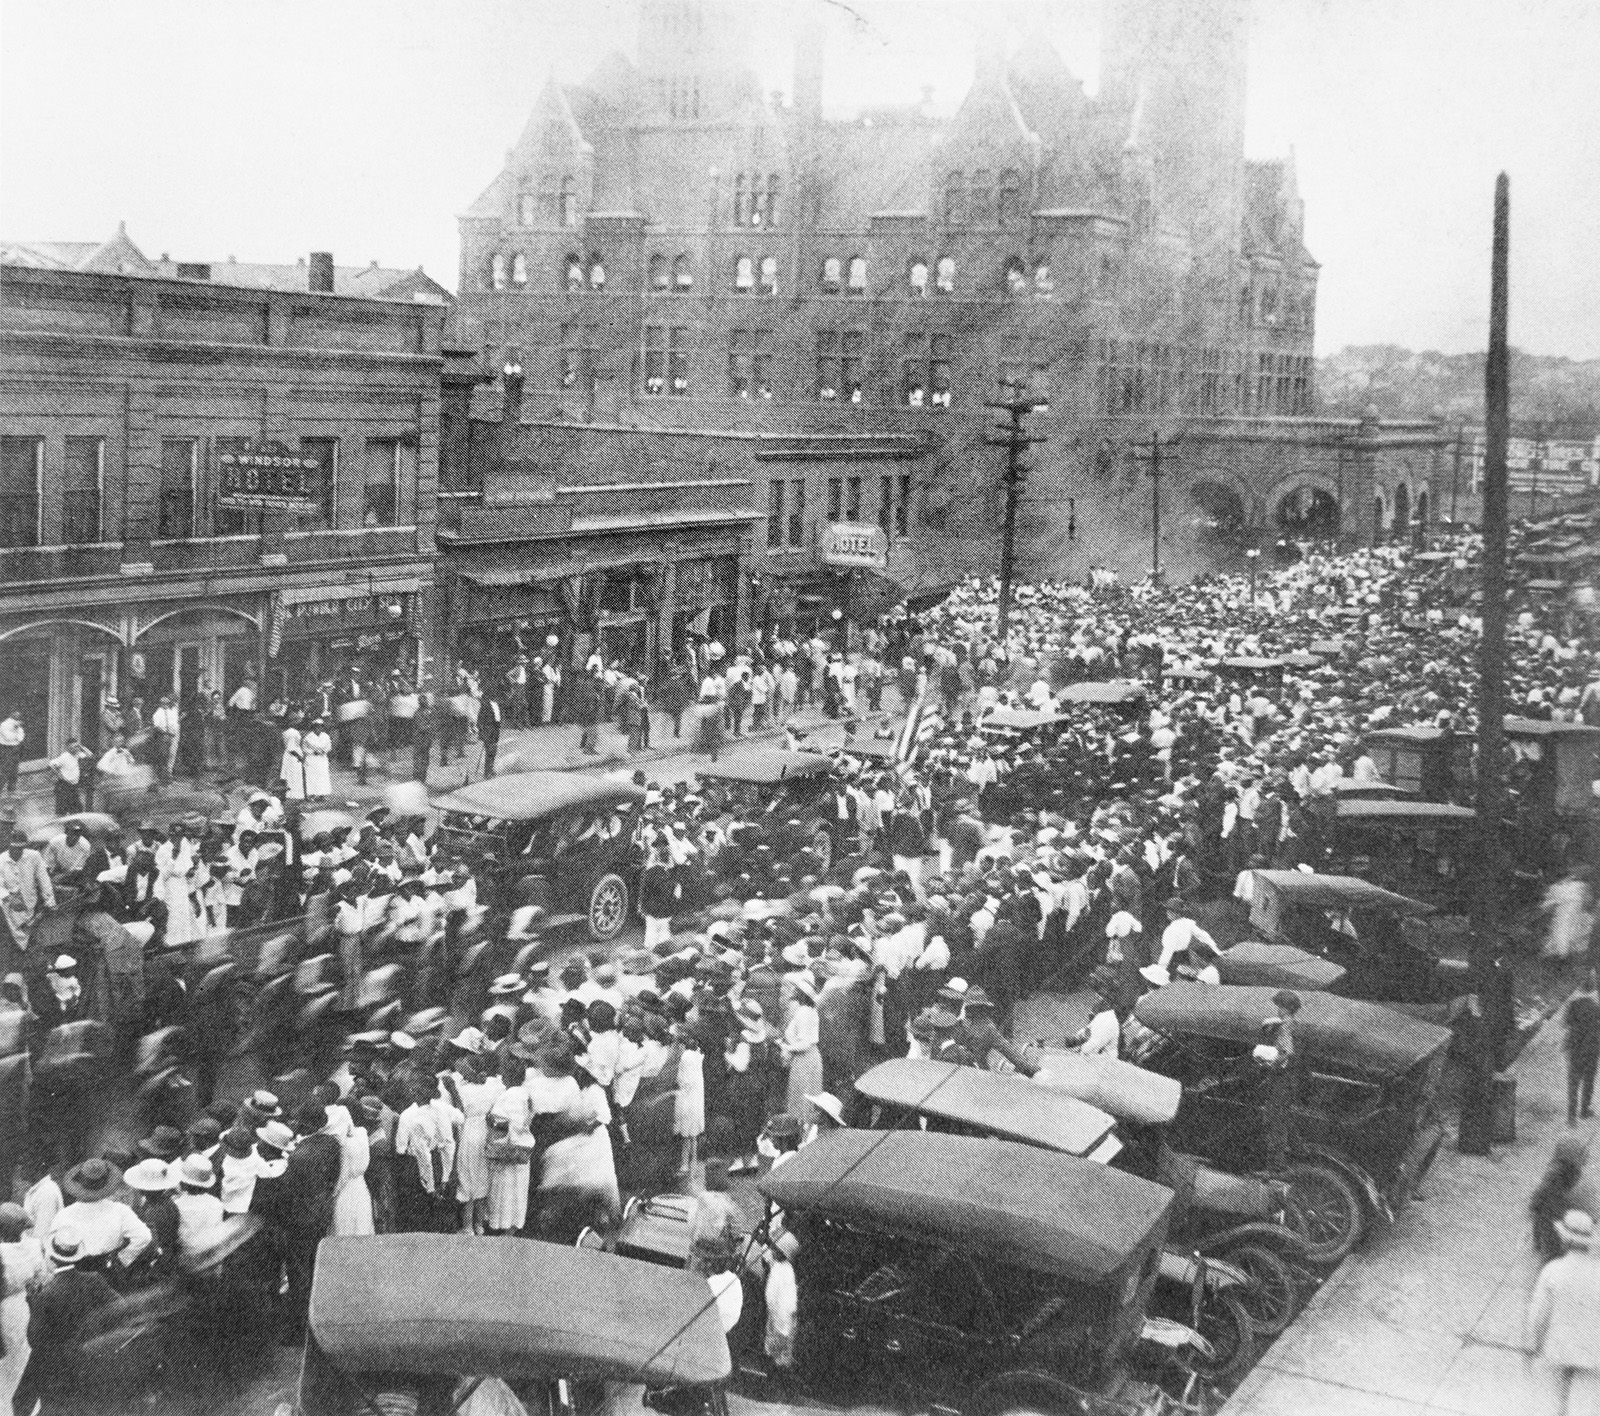 As a parade makes its way down Broadway, thousands of people gather in front of a hotel, shops and the city’s train station to watch. Parade participants are riding in and walking beside automobiles of the period.